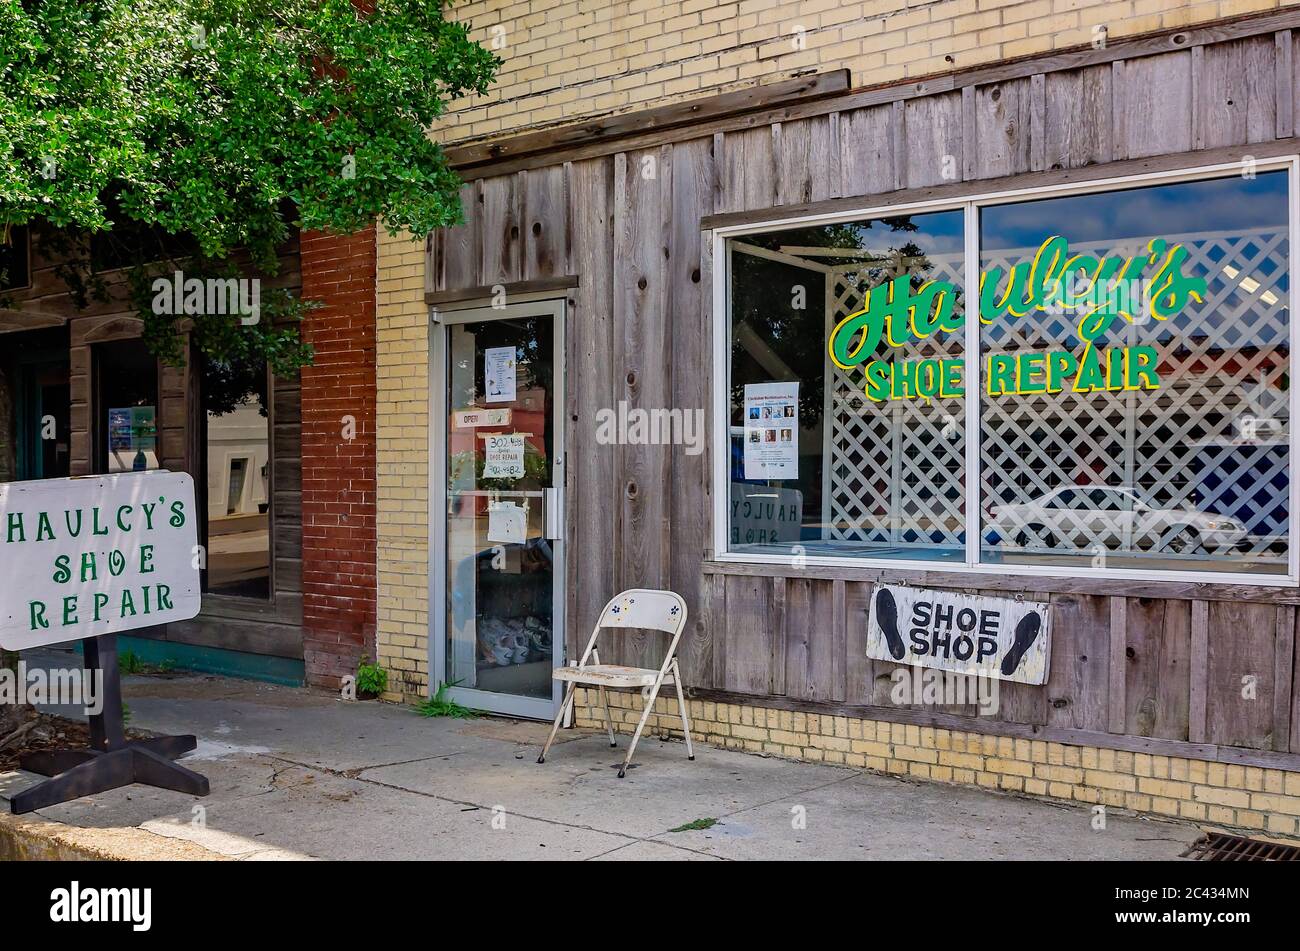 A folding chair sits outside Haulcy’s Shoe Repair, Aug. 9, 2016, in Clarksdale, Mississippi. Haulcy’s is a family-owned business established in 1885. Stock Photo